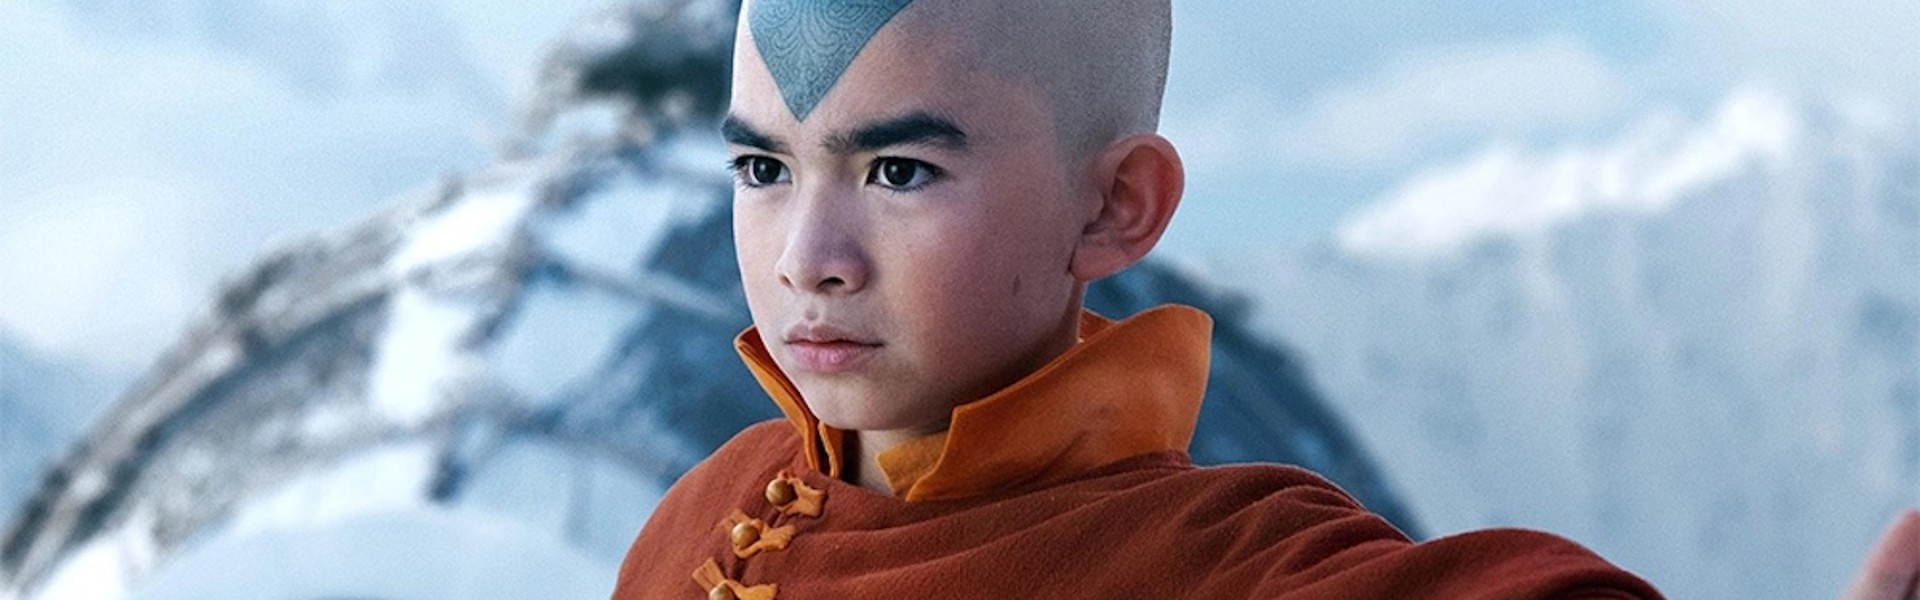 The first trailer for “Avatar: The Last Airbender” is here. Check out the photos